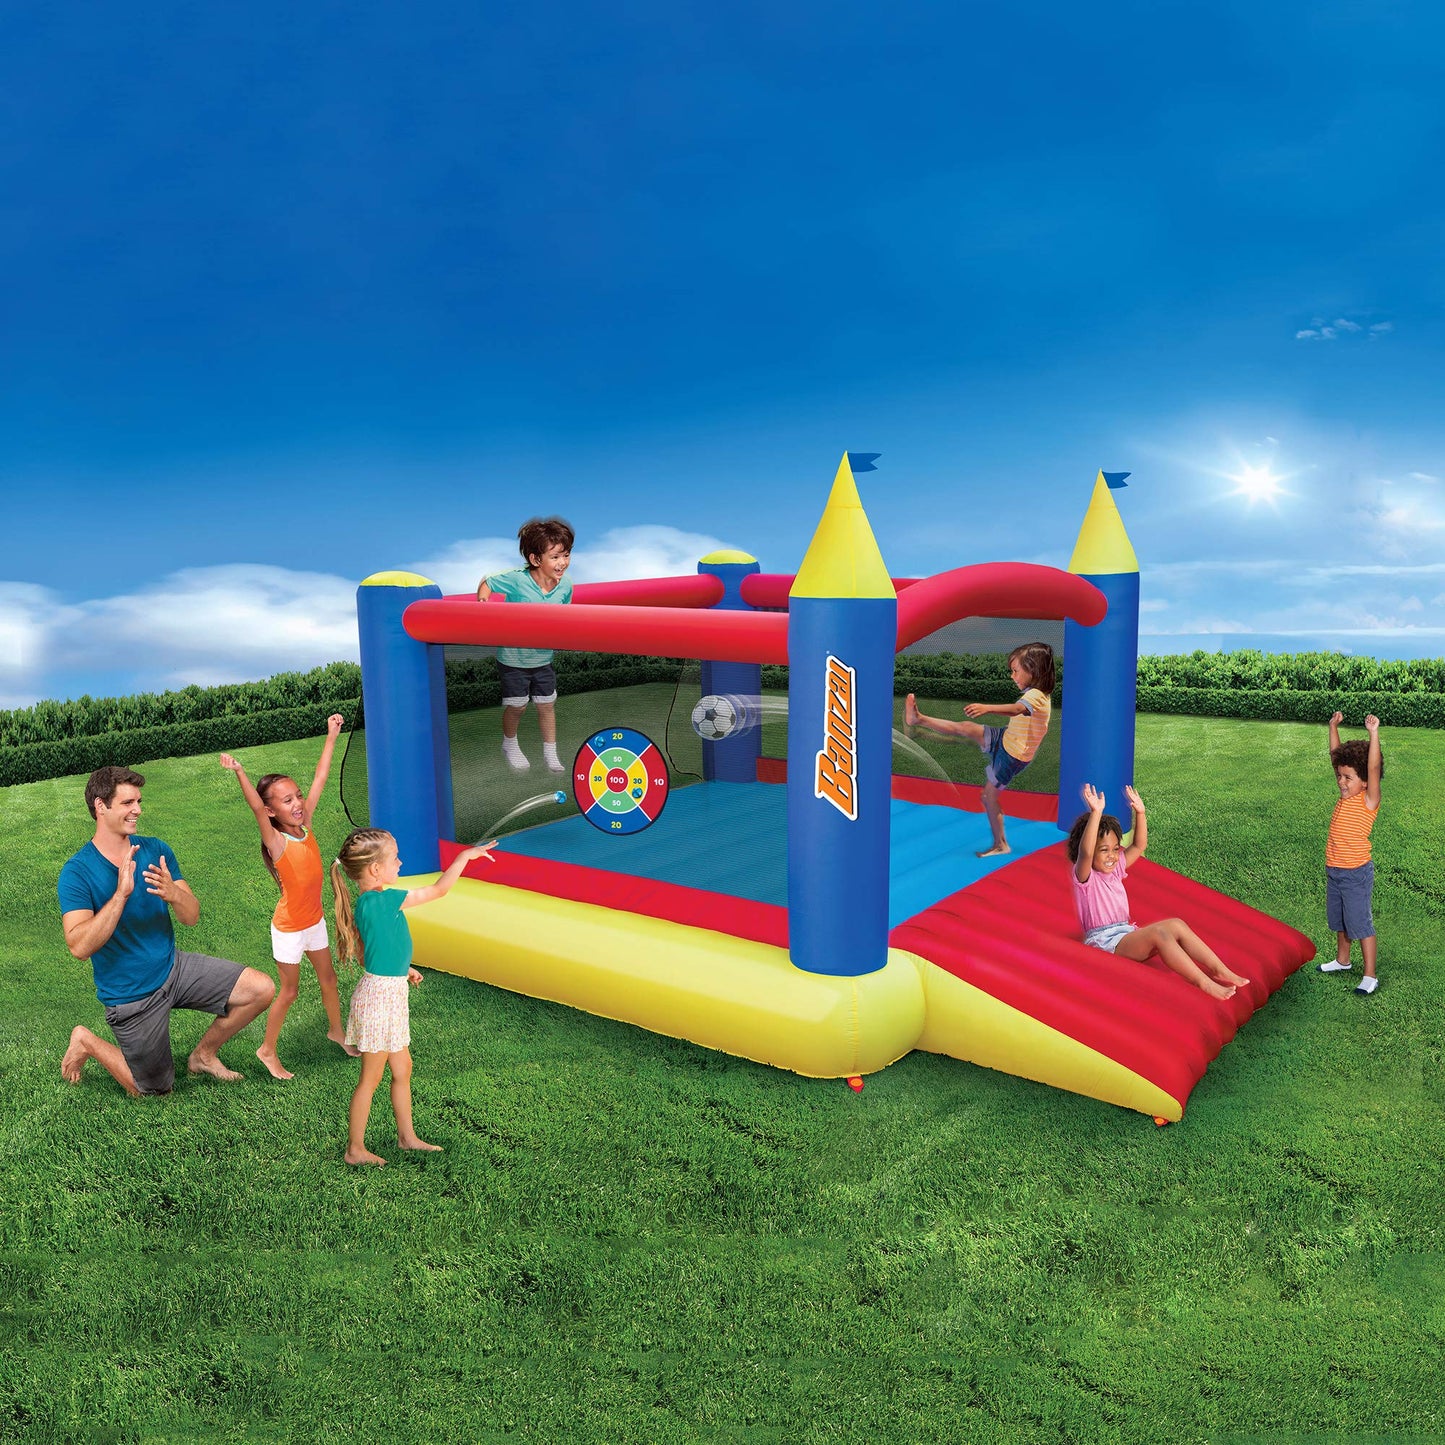 BANZAI Inflatable Water Slide & Bounce House (Combo Pack) - Huge Heavy Duty Outdoor Kids Adventure Park Pool with Sprinkler Wave and Slide Plus Large Bonus 12’x9 Bounce House - Free Blower Included